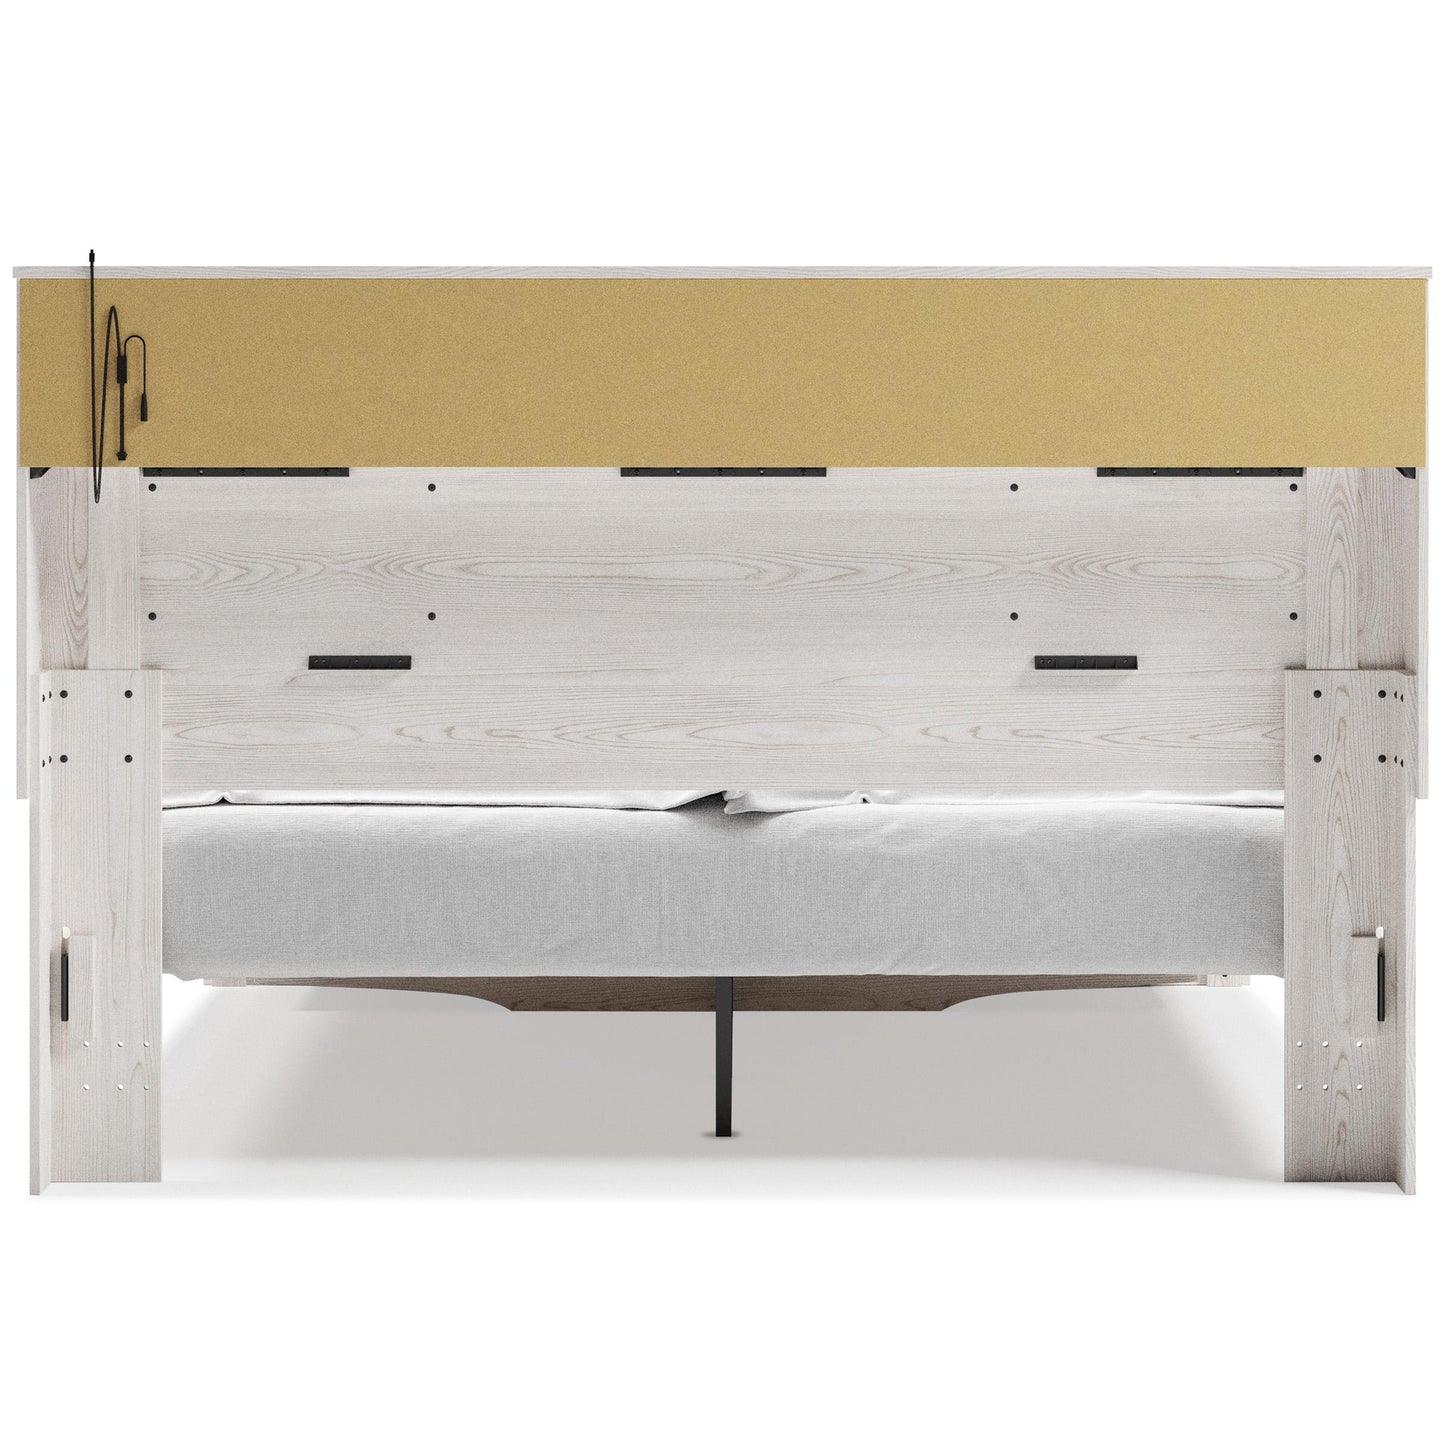 Signature Design by Ashley Altyra King Upholstered Bookcase Bed with Storage B2640-69/B2640-56S/B2640-95/B100-14 IMAGE 4